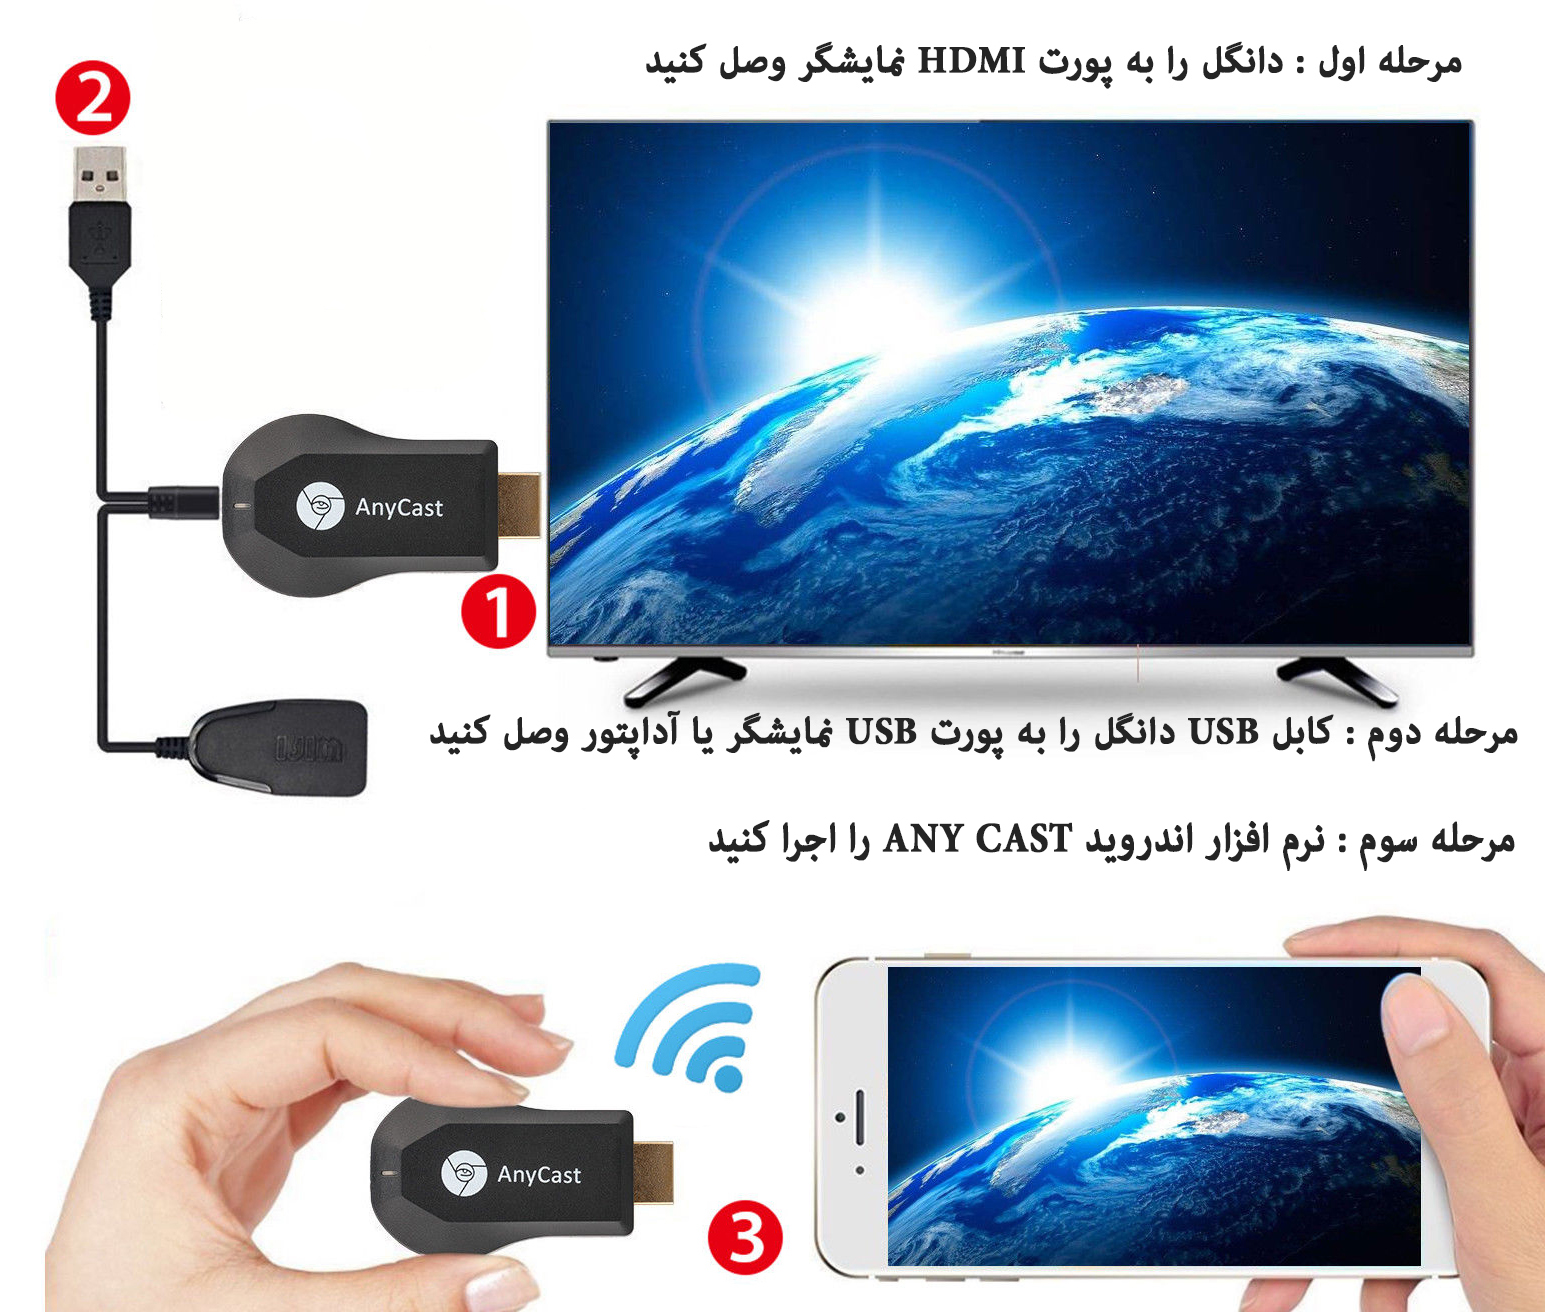 AnyCast%20Wi%20Fi%20Display%20TV%20Dongle%20Receiver%20(6)%20copy